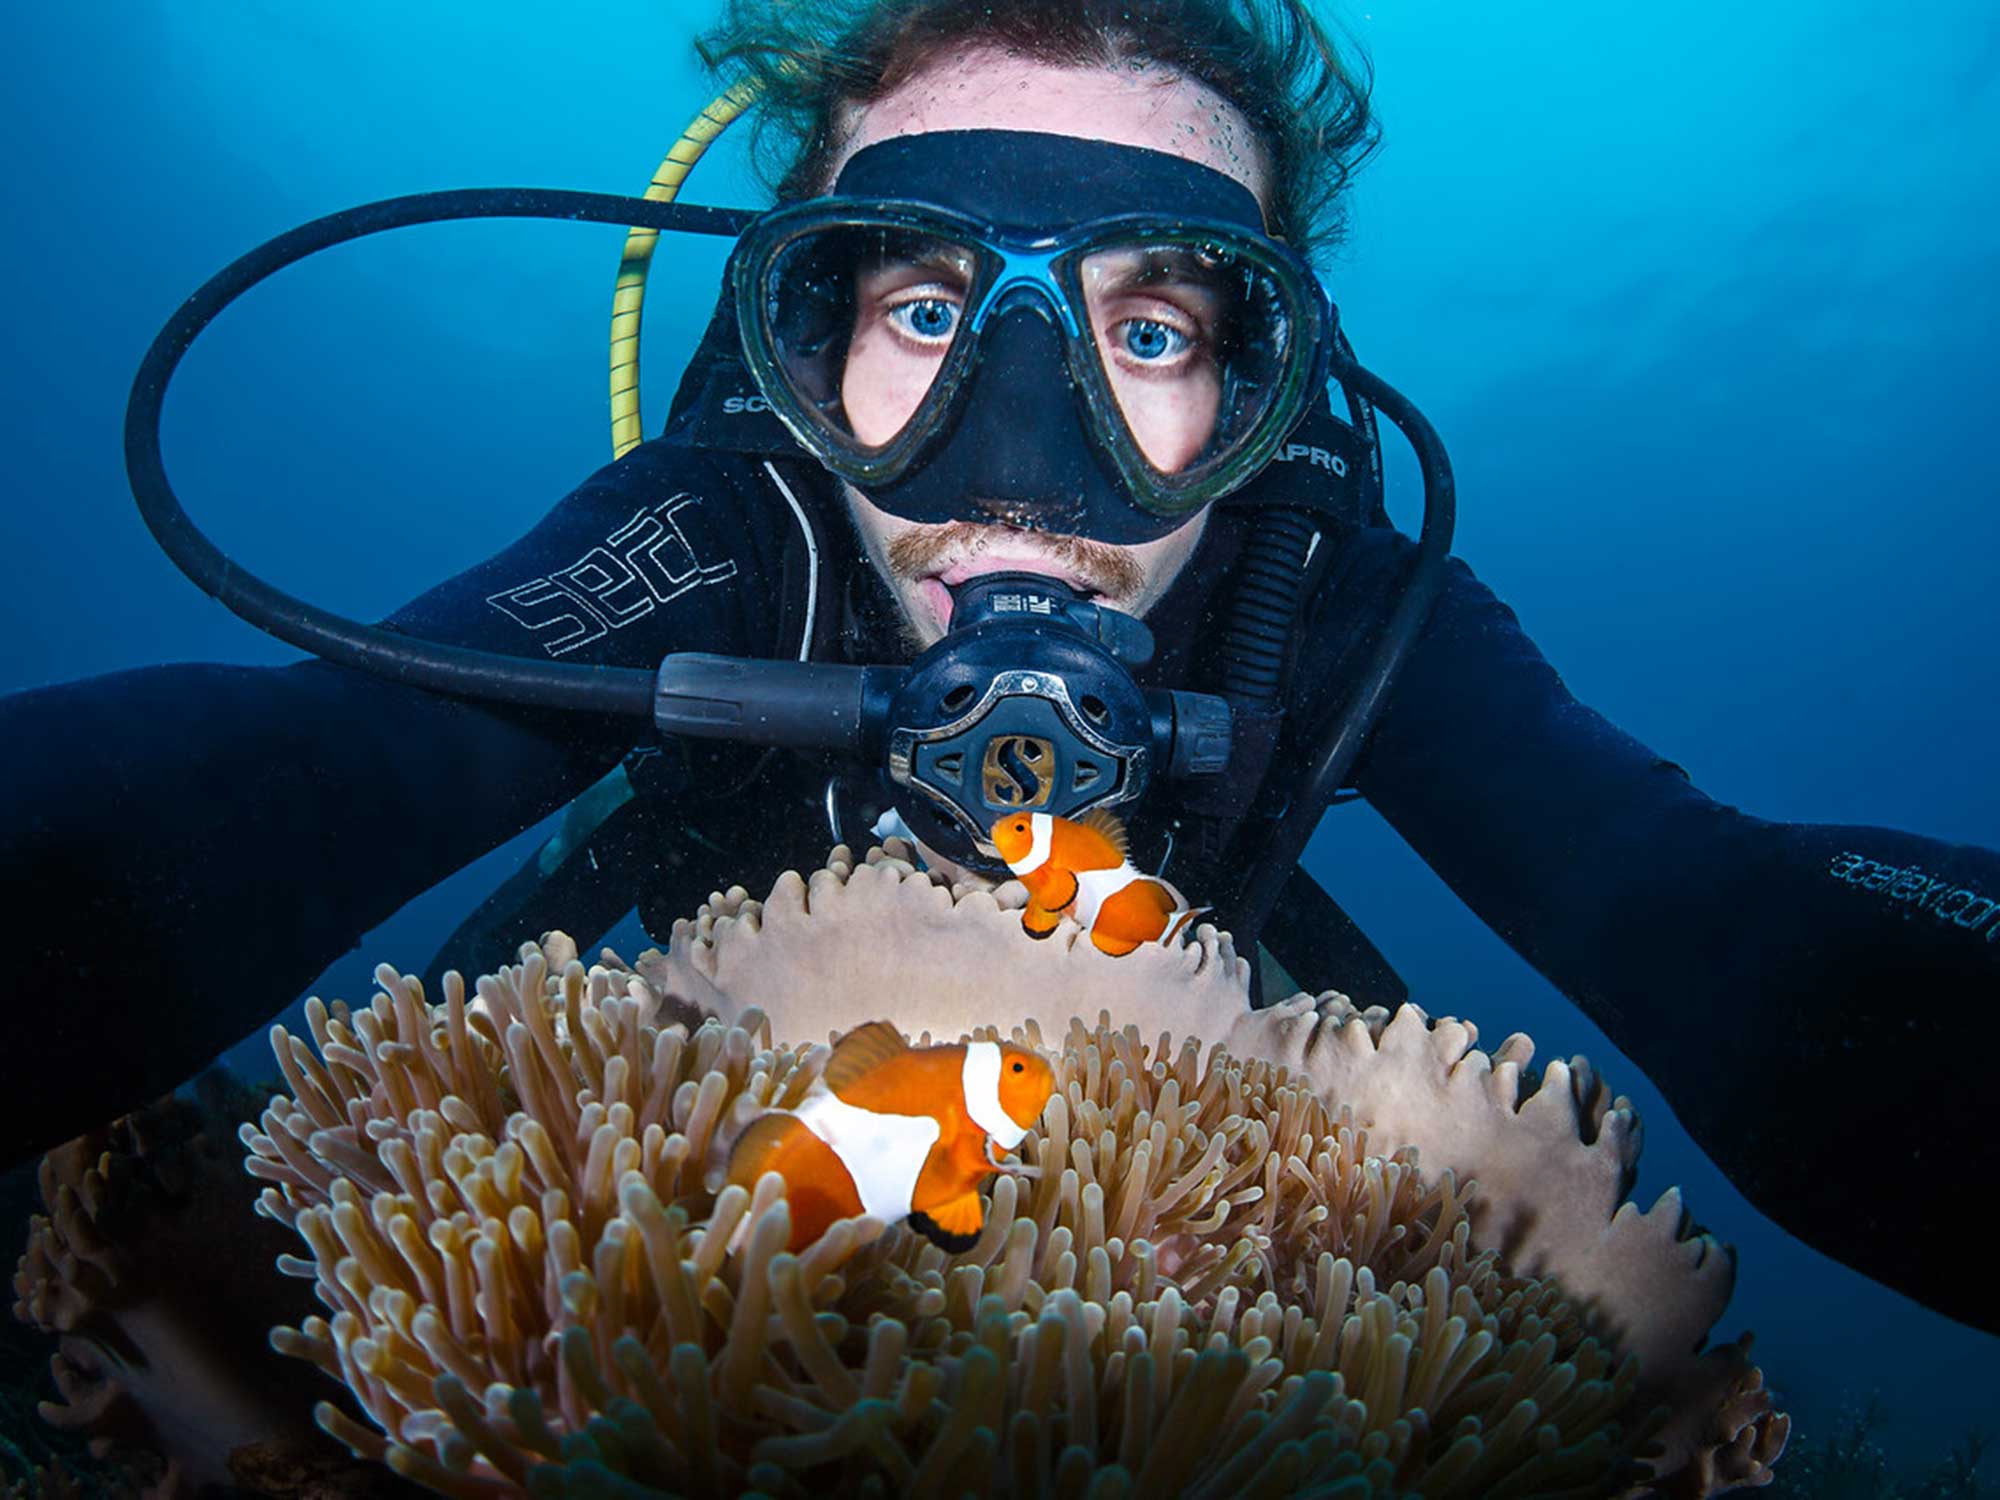 Workshop | 1-on-1 Underwater Photography Classes with Grant Thomas